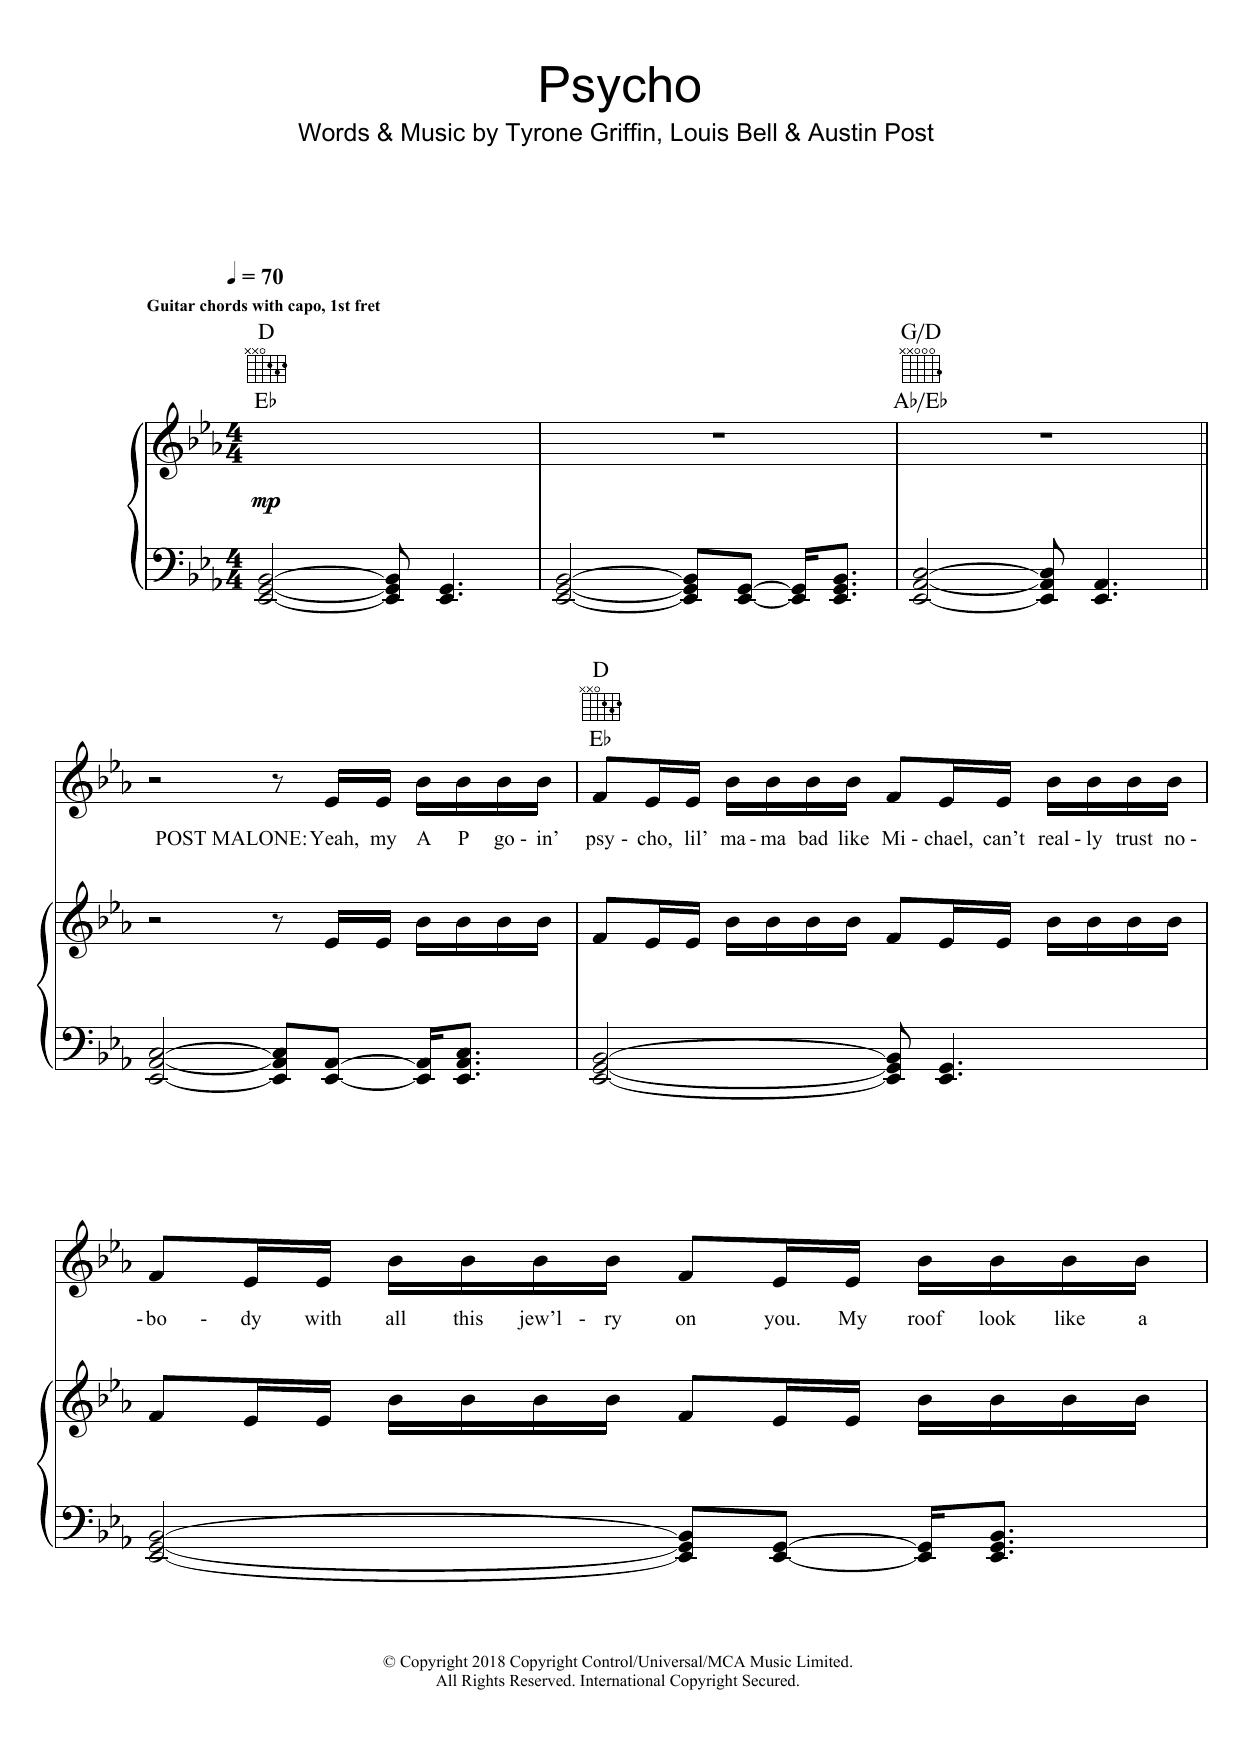 Download Post Malone Psycho (featuring Ty Dolla $ign) Sheet Music